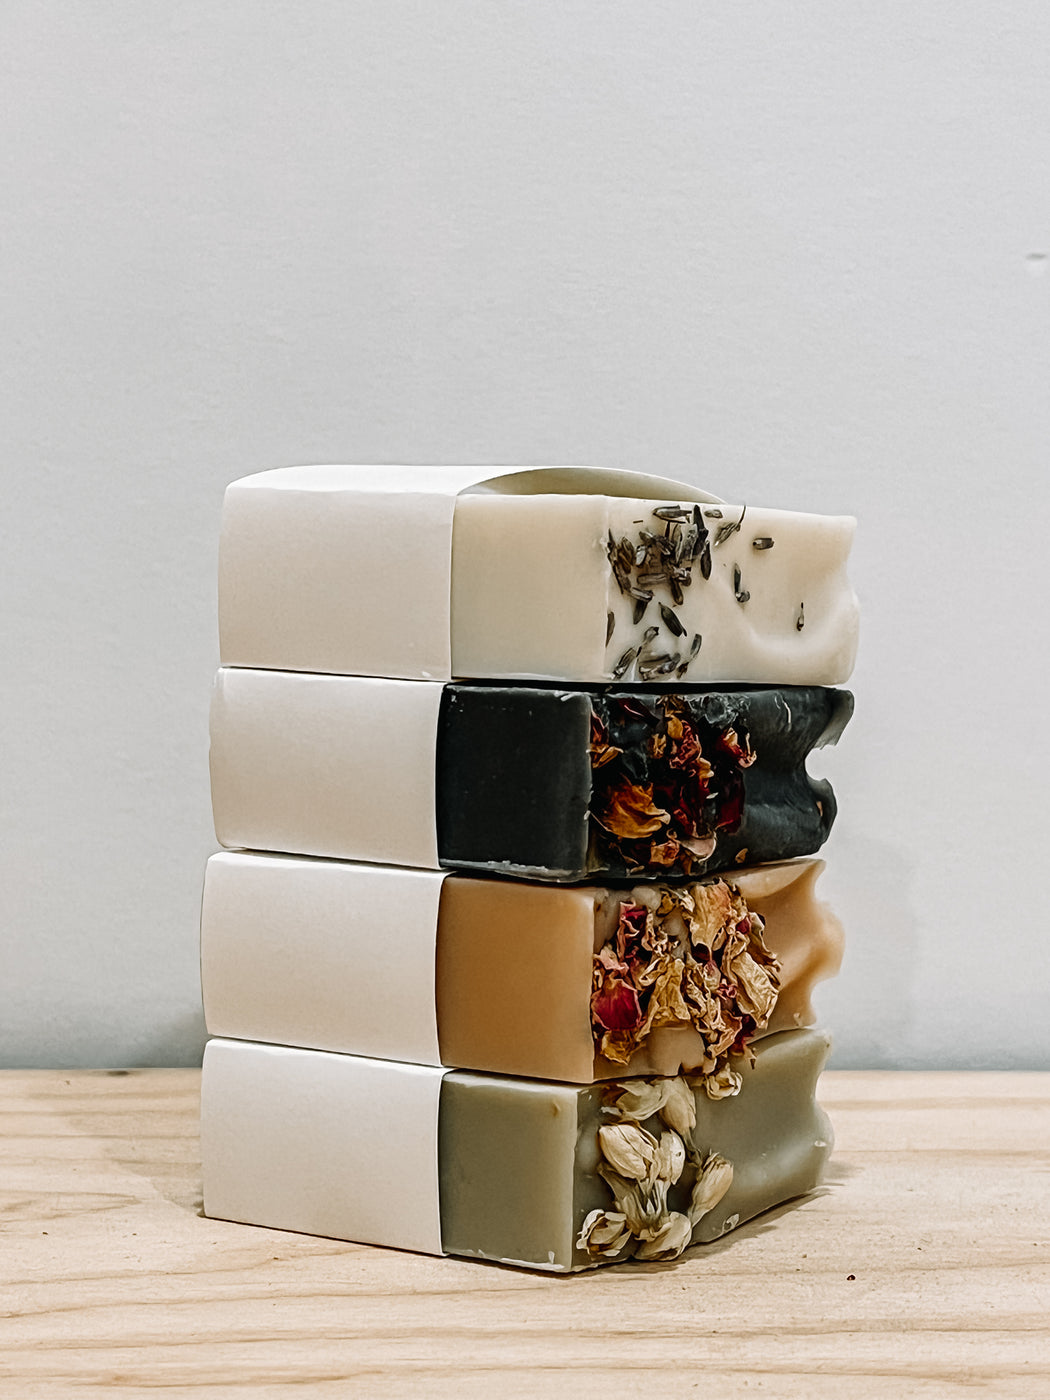 Agha Studio- Body + Face Soap Bars Various Scents